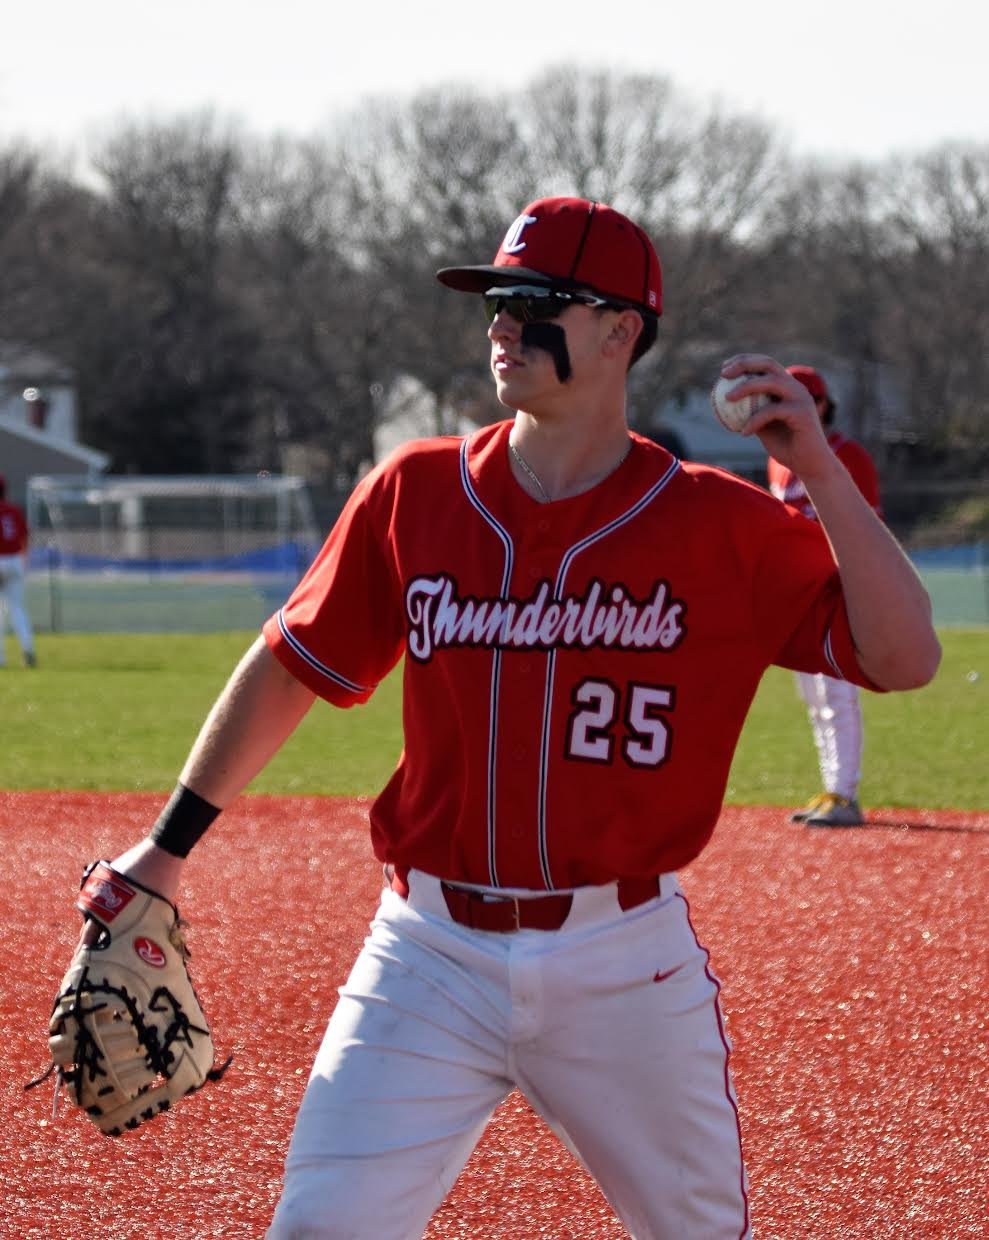 Dylan Thomason struck out five for Connetquot to earn the Centereach win.